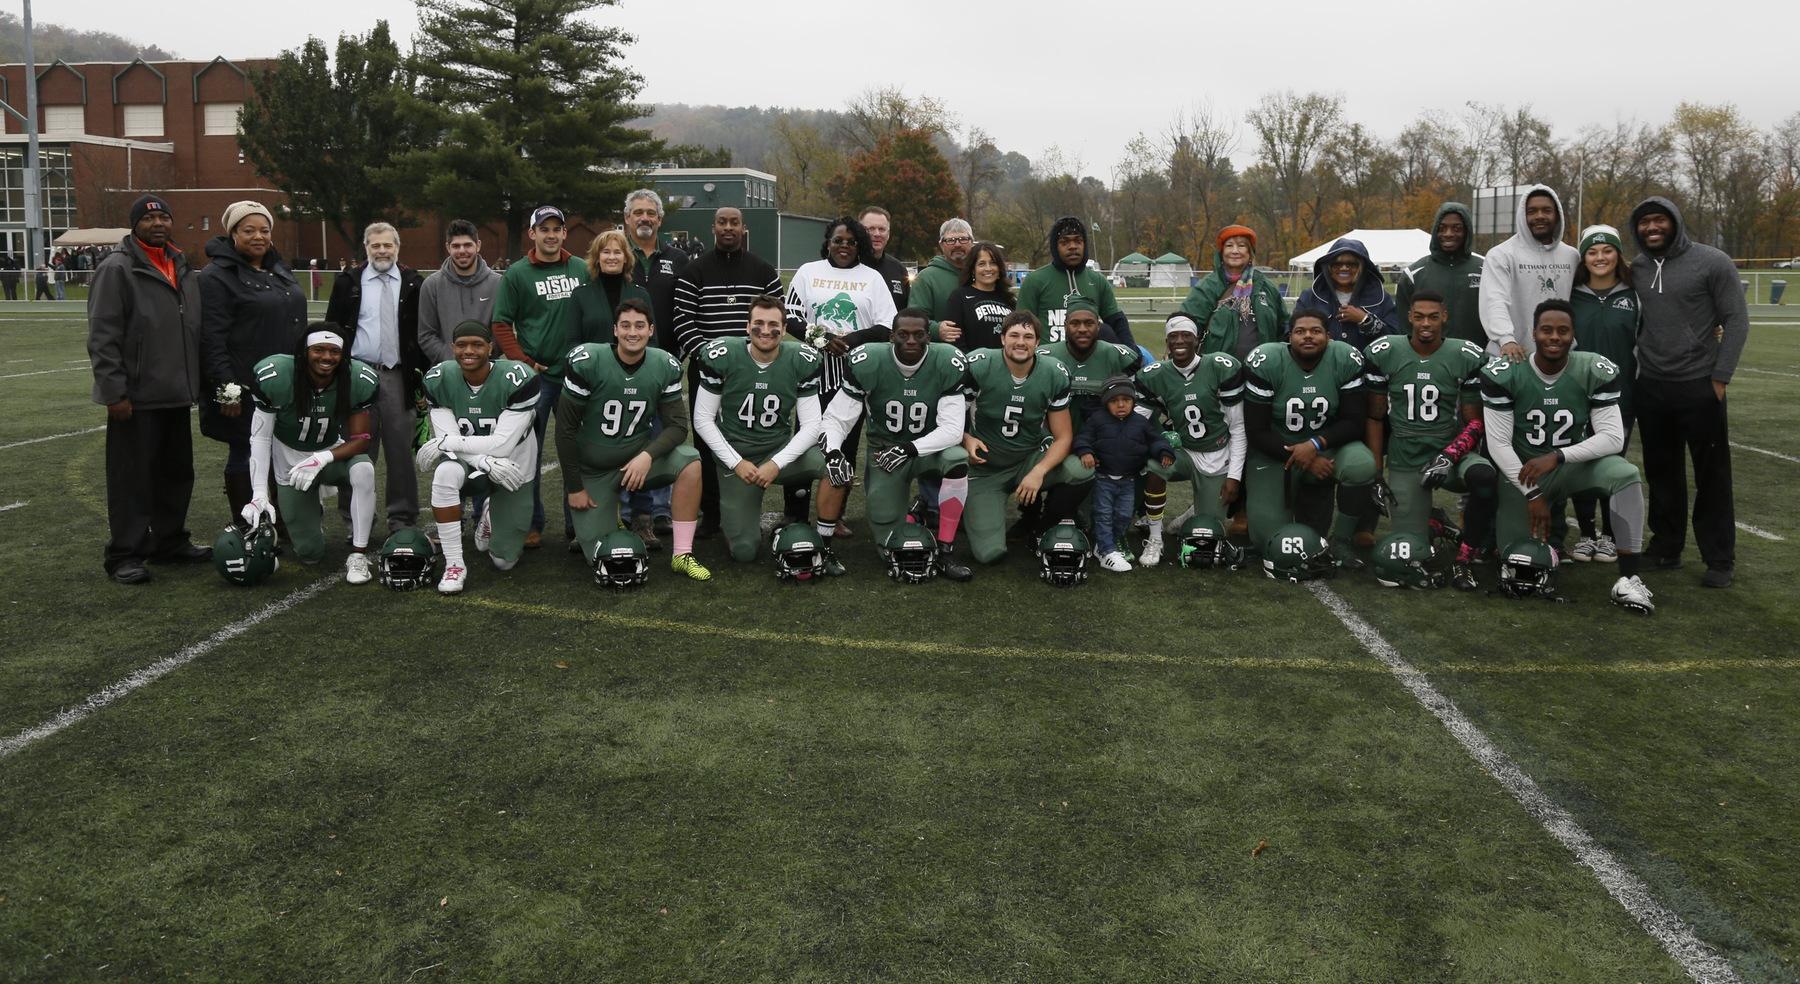 Bison defeated by Thomas More on Senior Day, 21-0